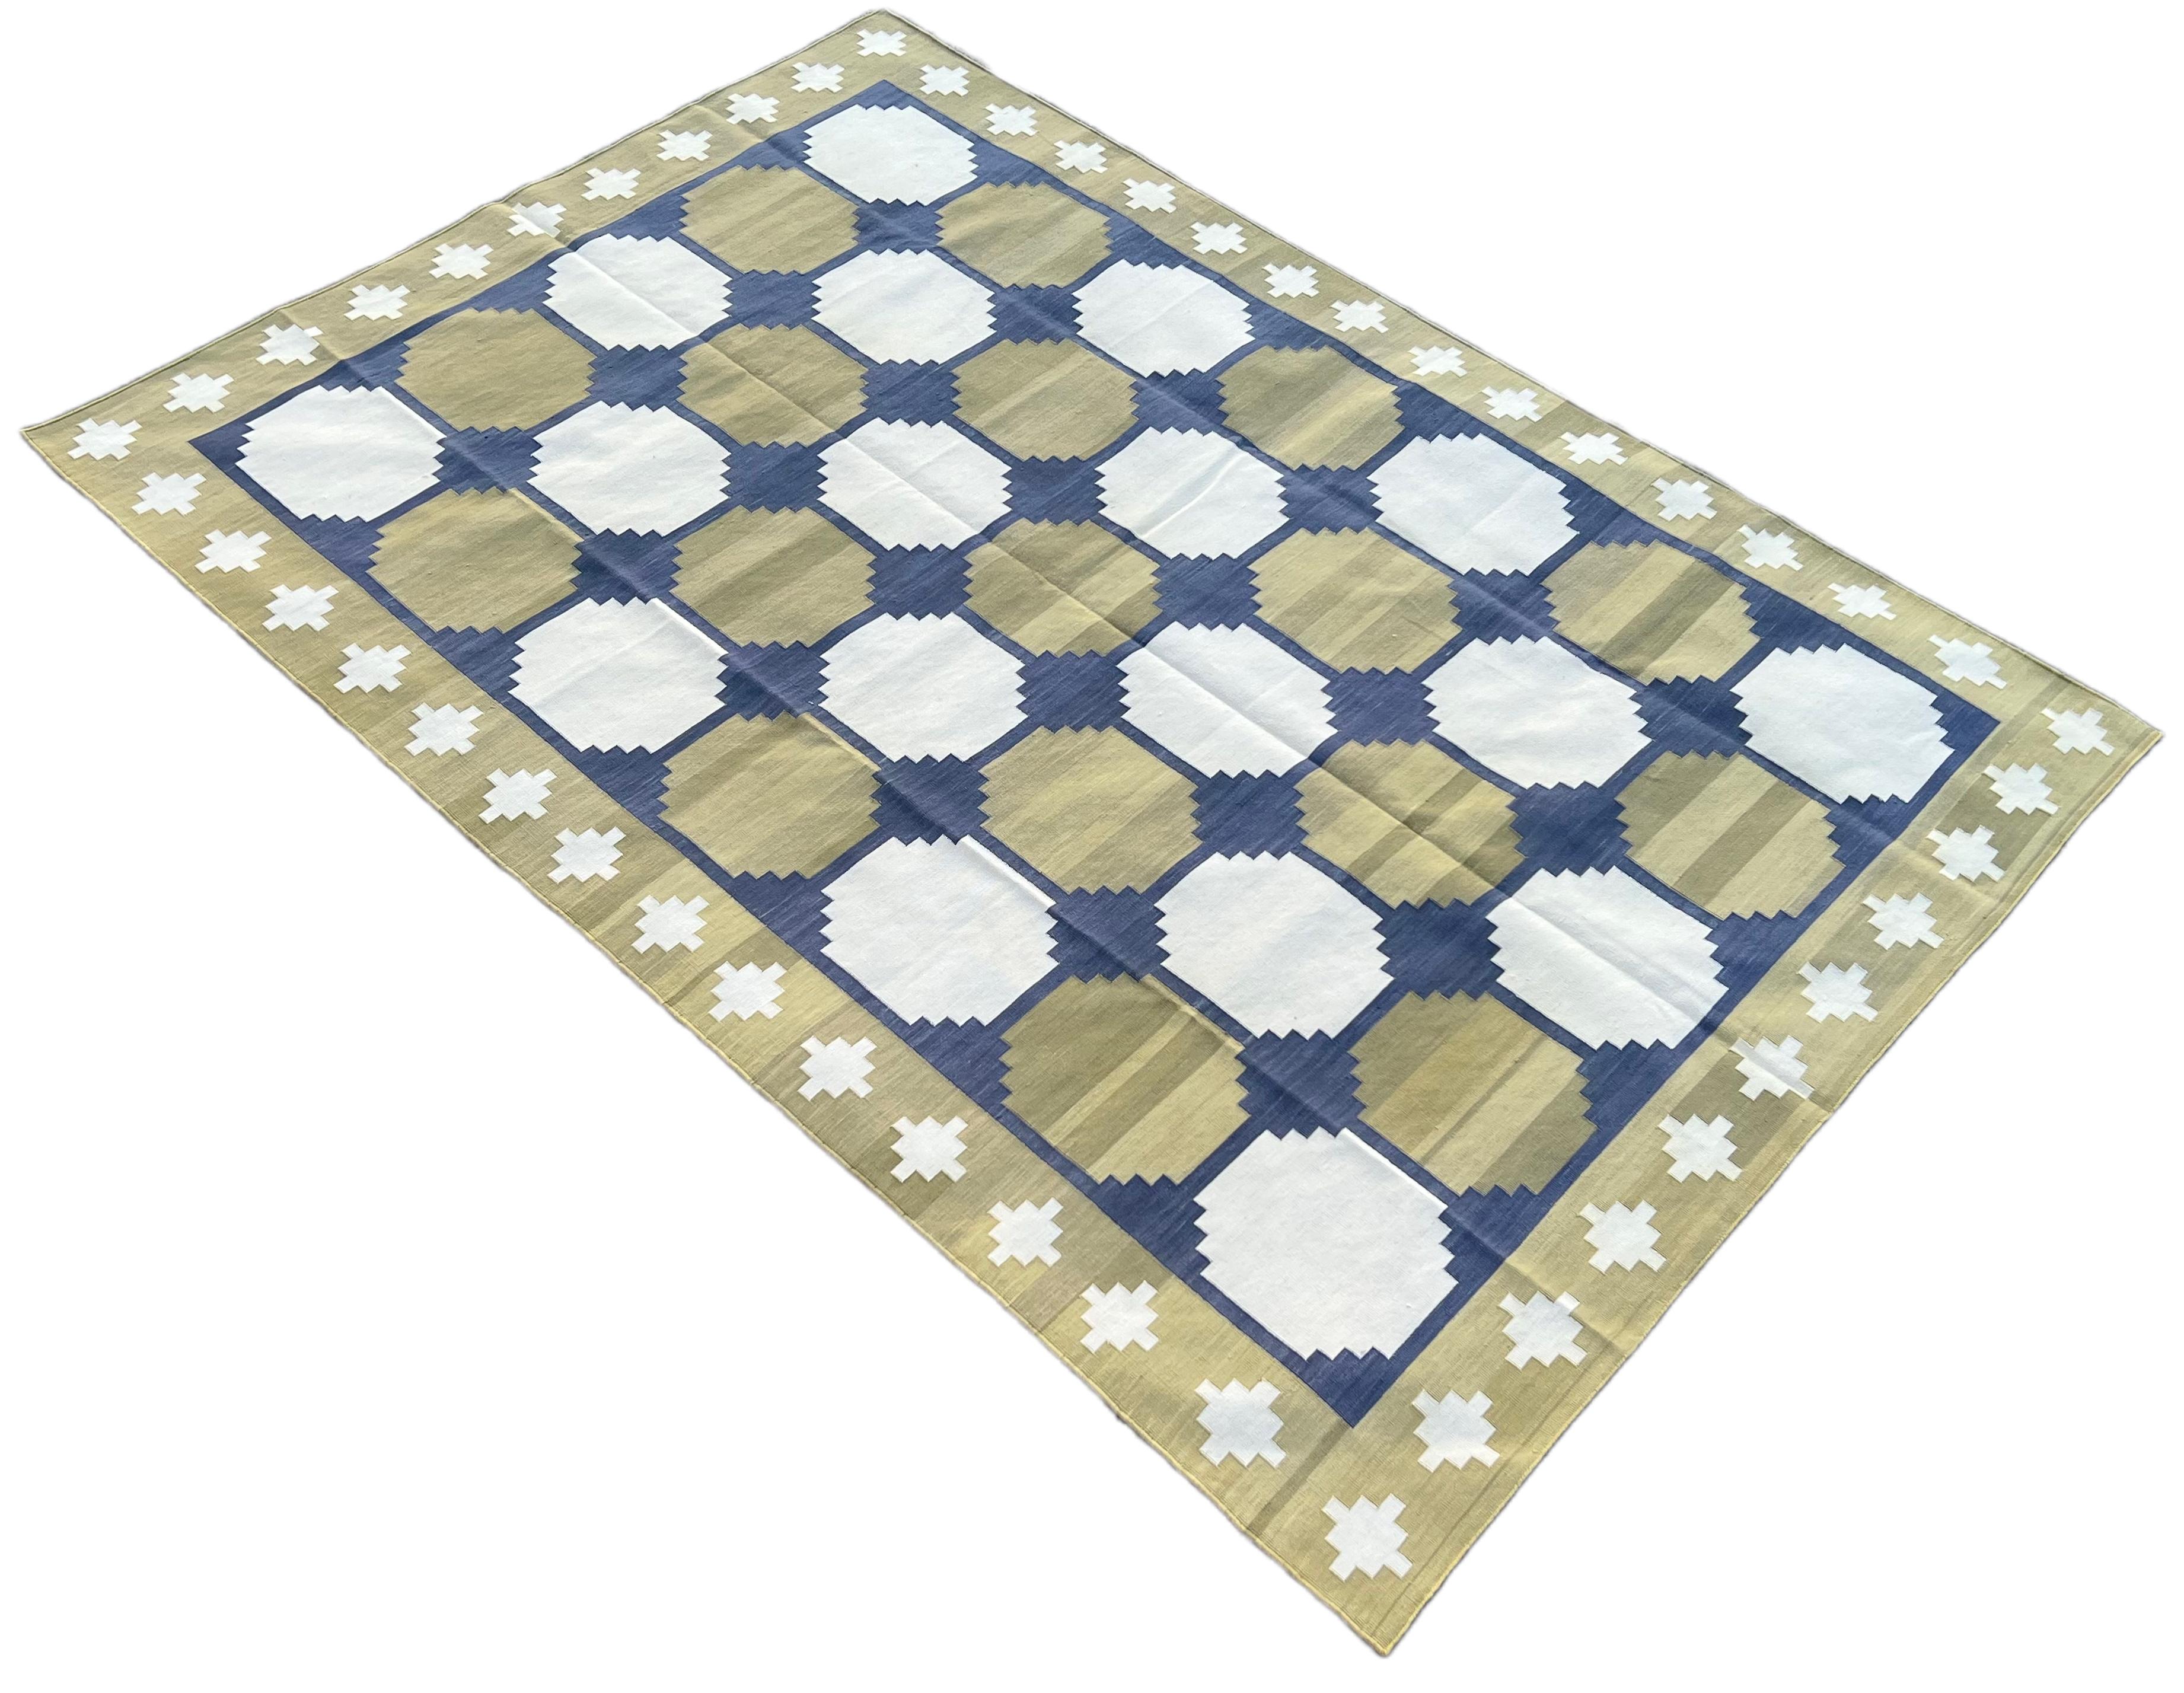 Cotton Vegetable Dyed Reversible Olive Green, Blue And Cream Geometric Patterned Tile Indian Rug - 6'x9'
These special flat-weave dhurries are hand-woven with 15 ply 100% cotton yarn. Due to the special manufacturing techniques used to create our